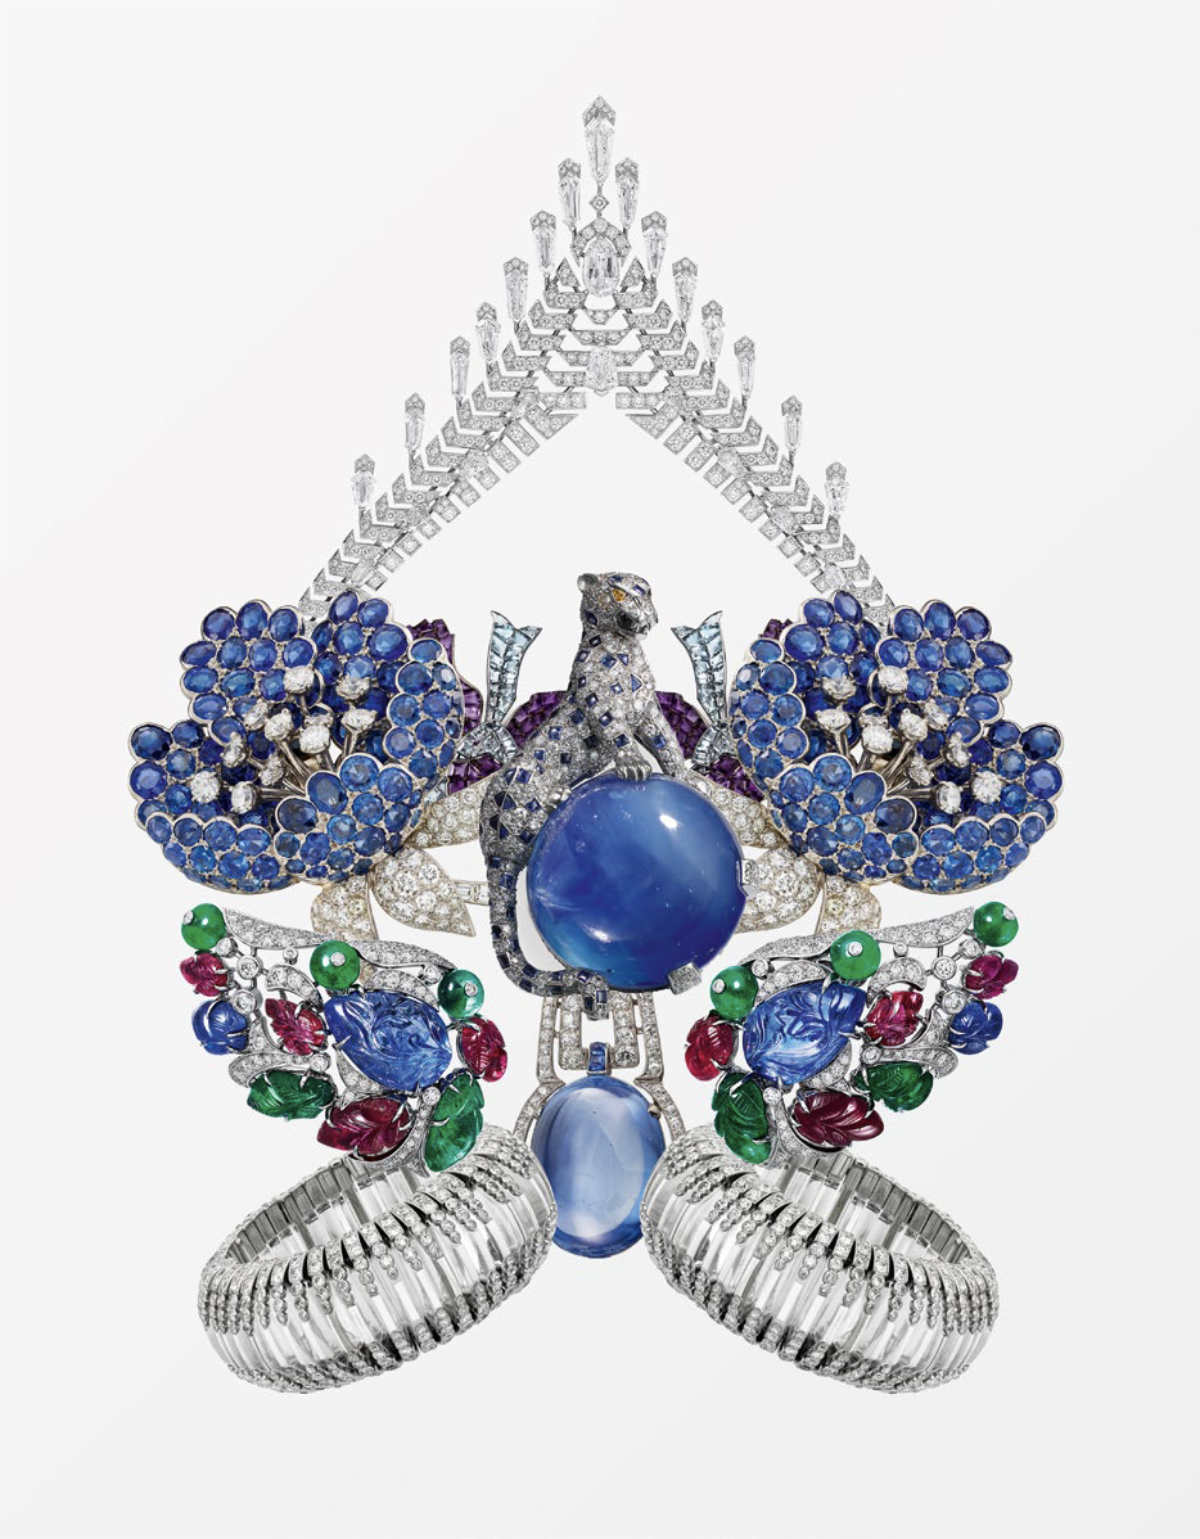 The Cartier Style: High Jewelry Exhibition Geneva